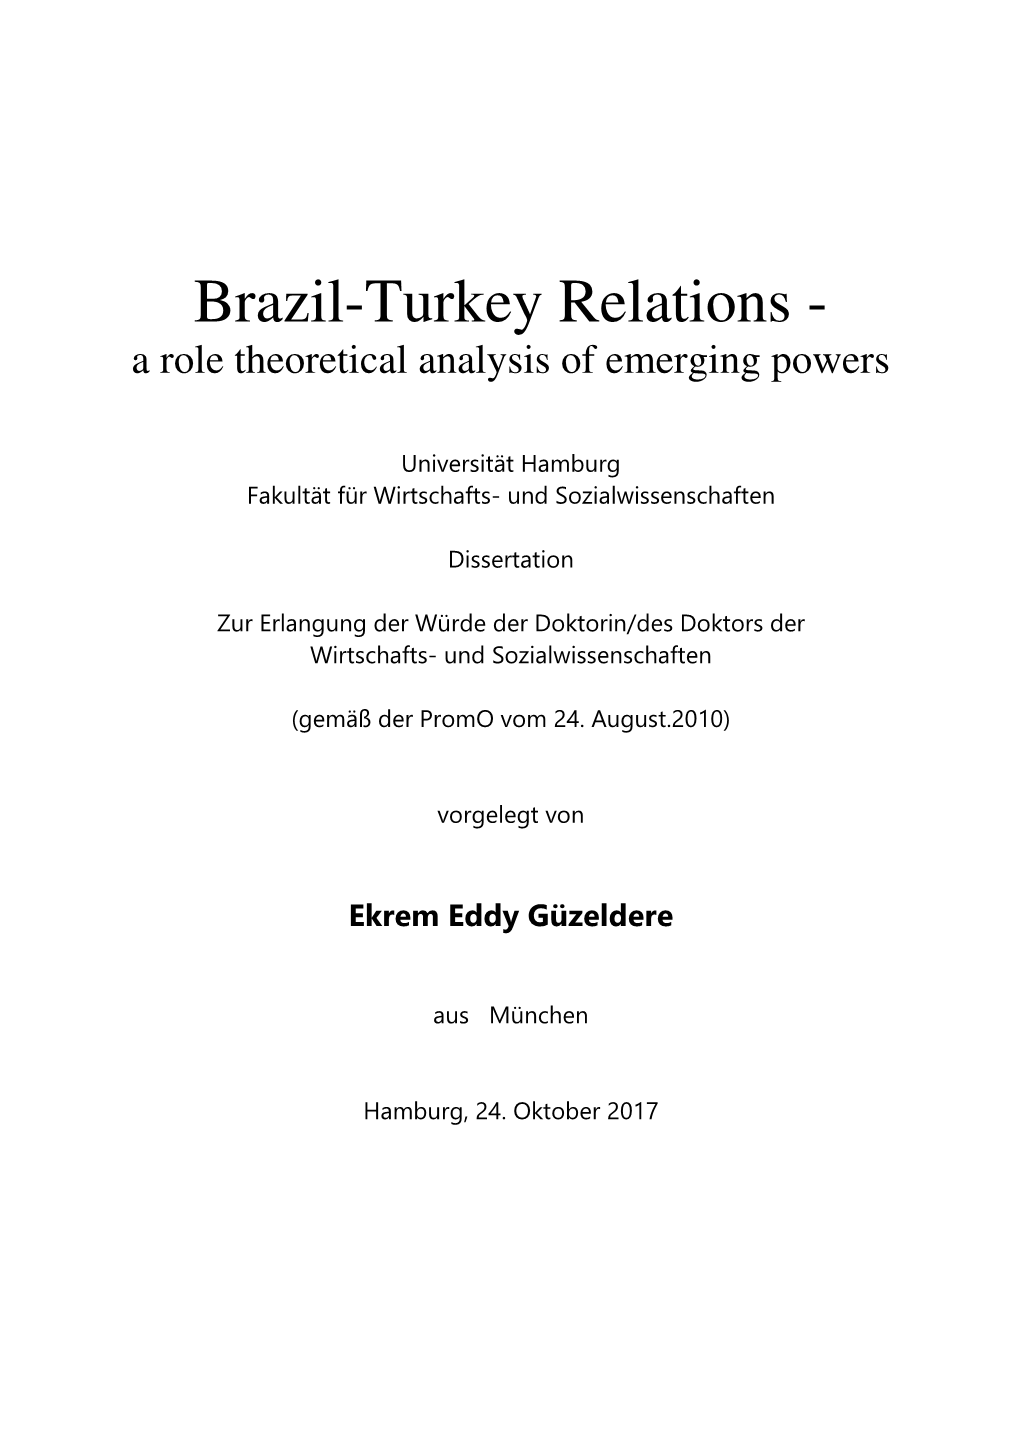 Brazil-Turkey Relations - a Role Theoretical Analysis of Emerging Powers